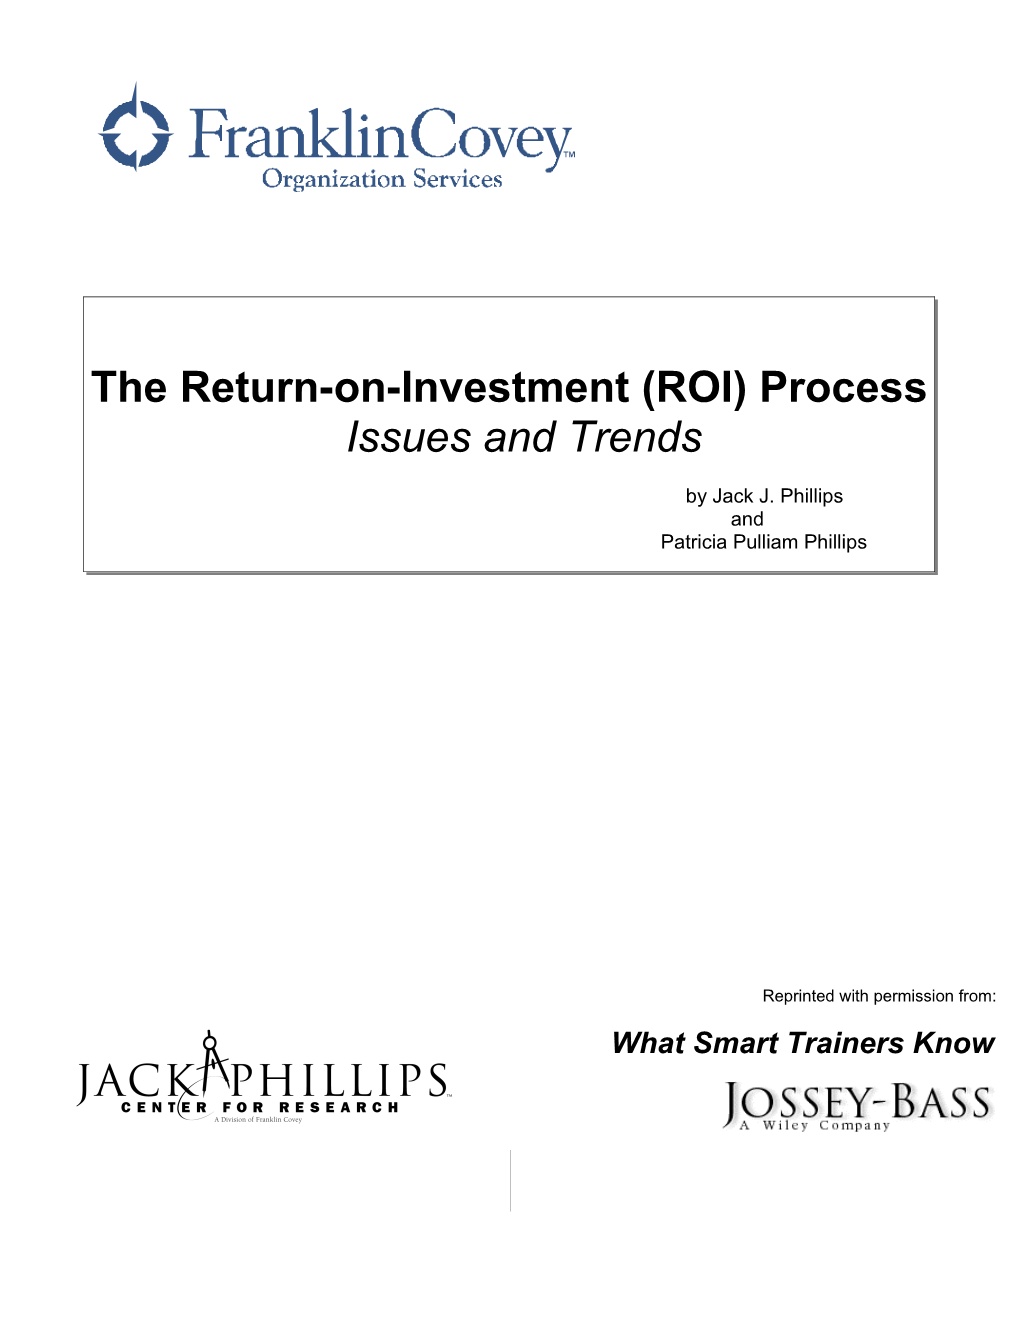 The ROI Process: Issues and Trends